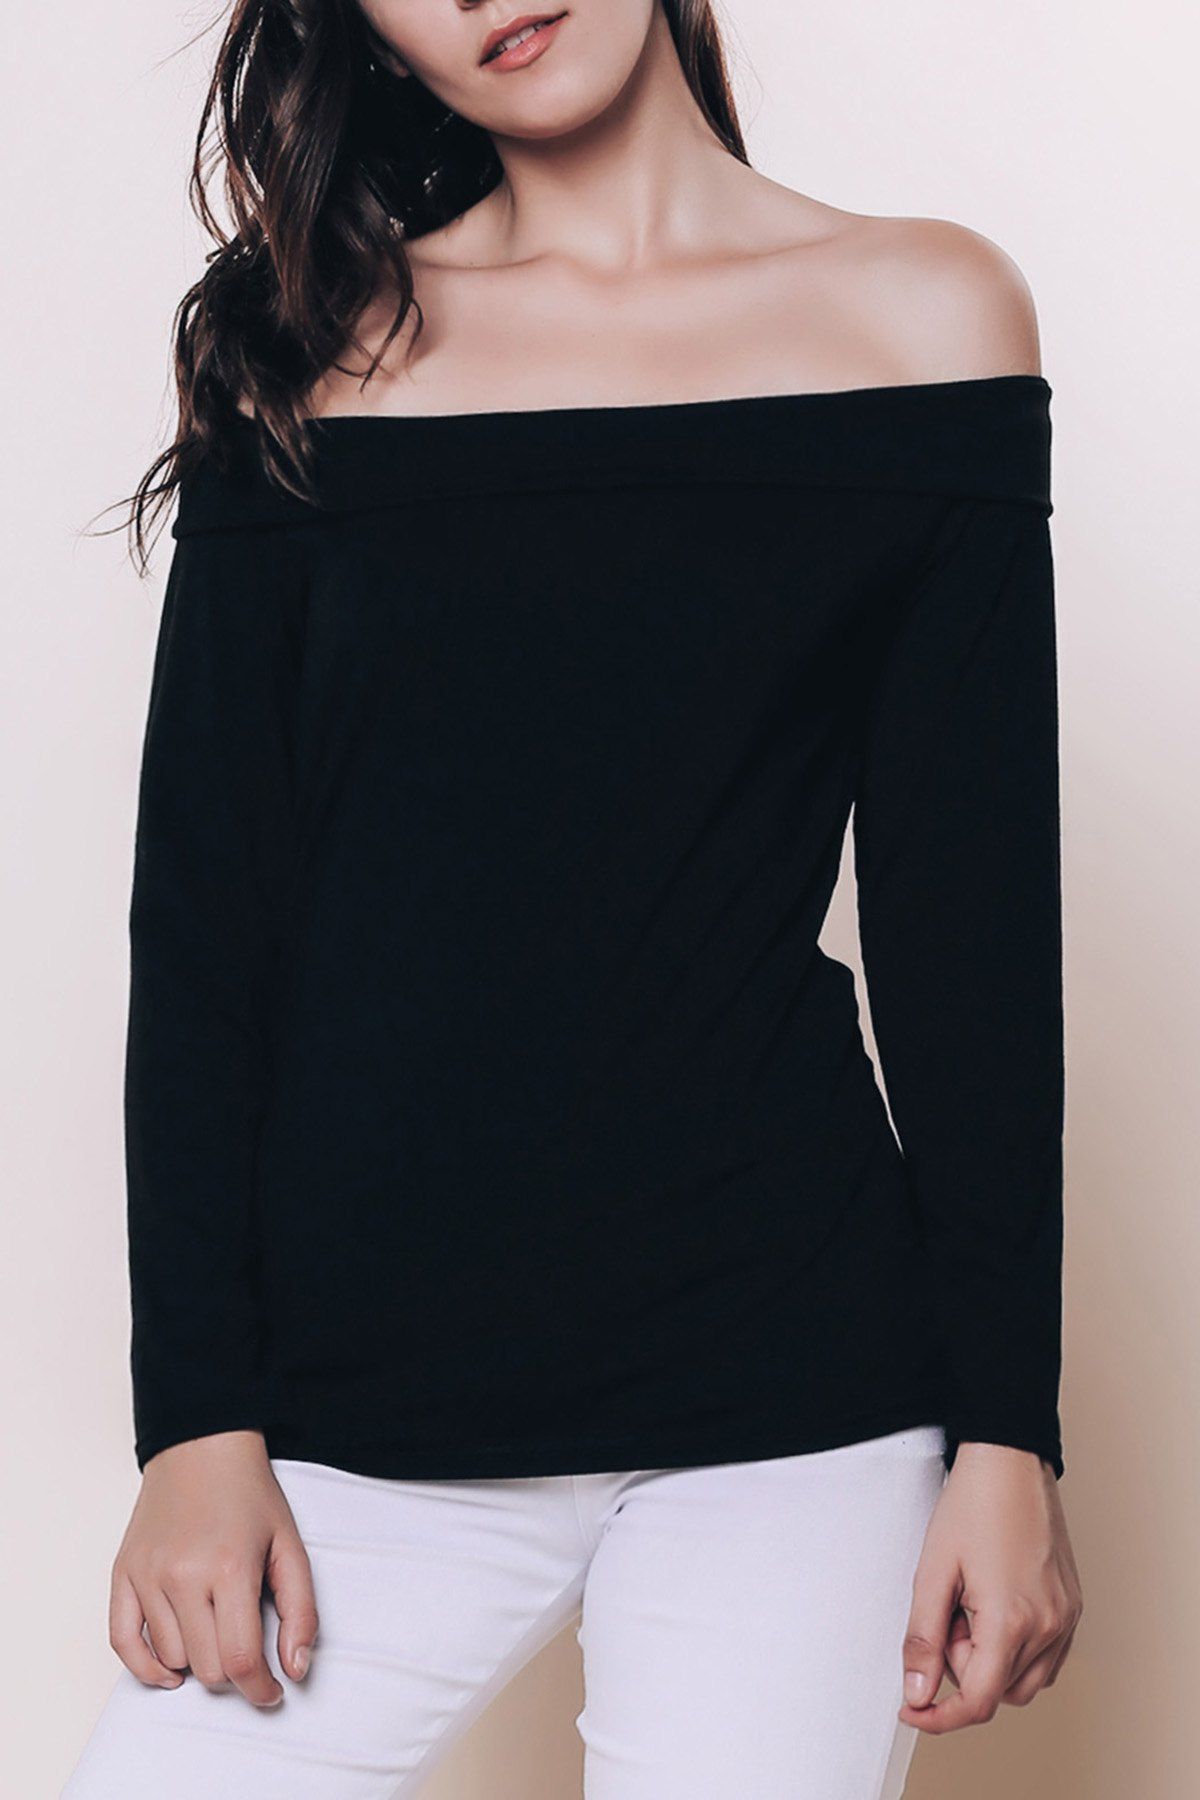 [41% OFF] Sexy Off The Shoulder Black Long Sleeve T-Shirt For Women ...